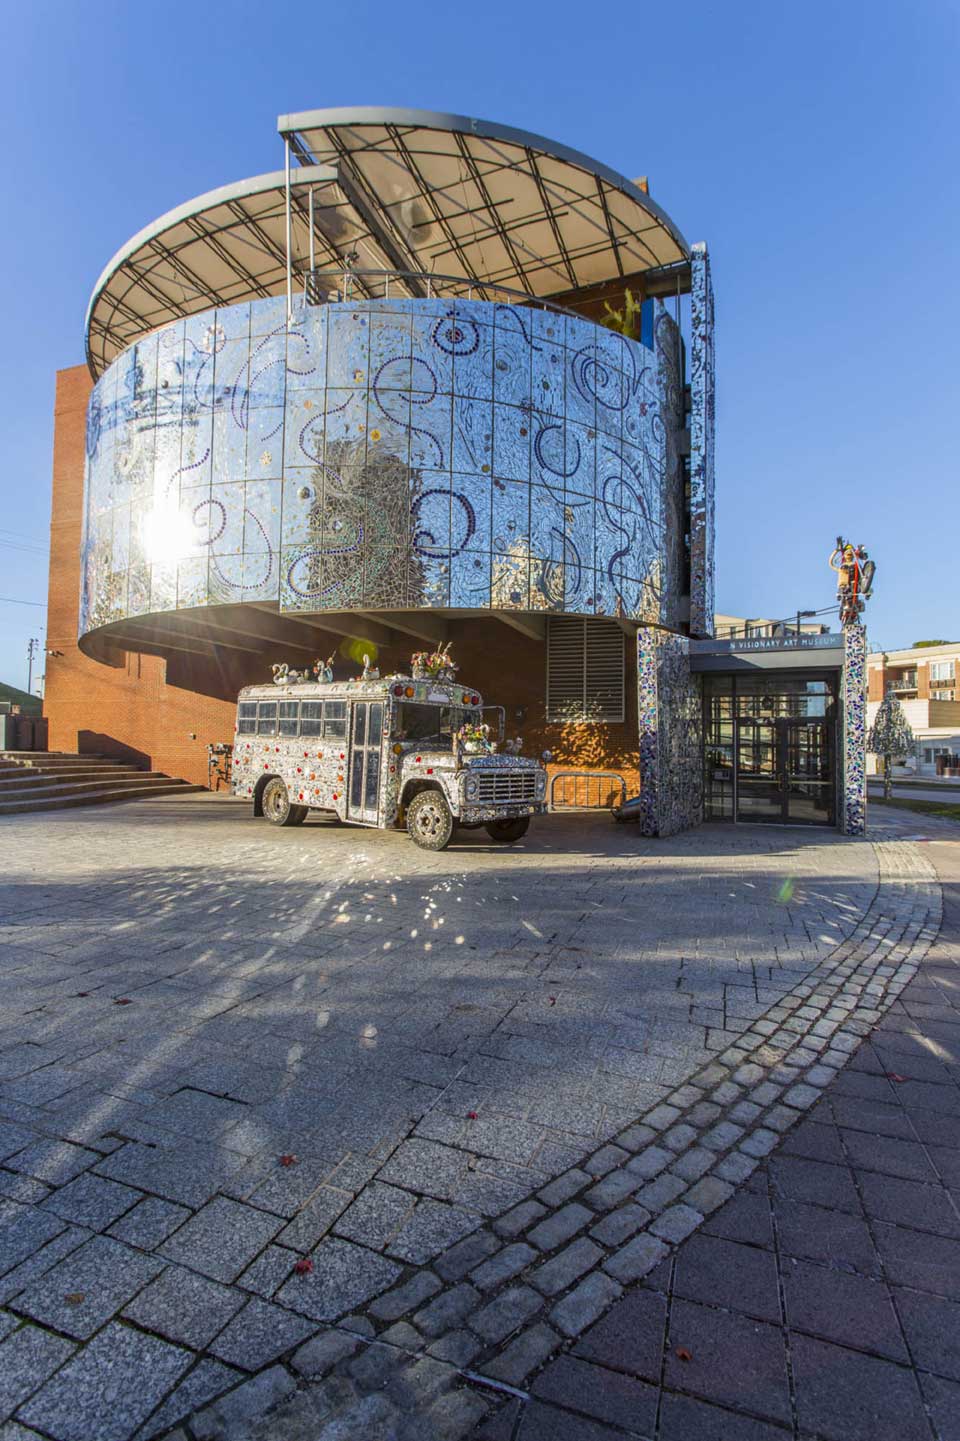 American Visionary Art Museum and bus in Federal Hill, Baltimore, MD